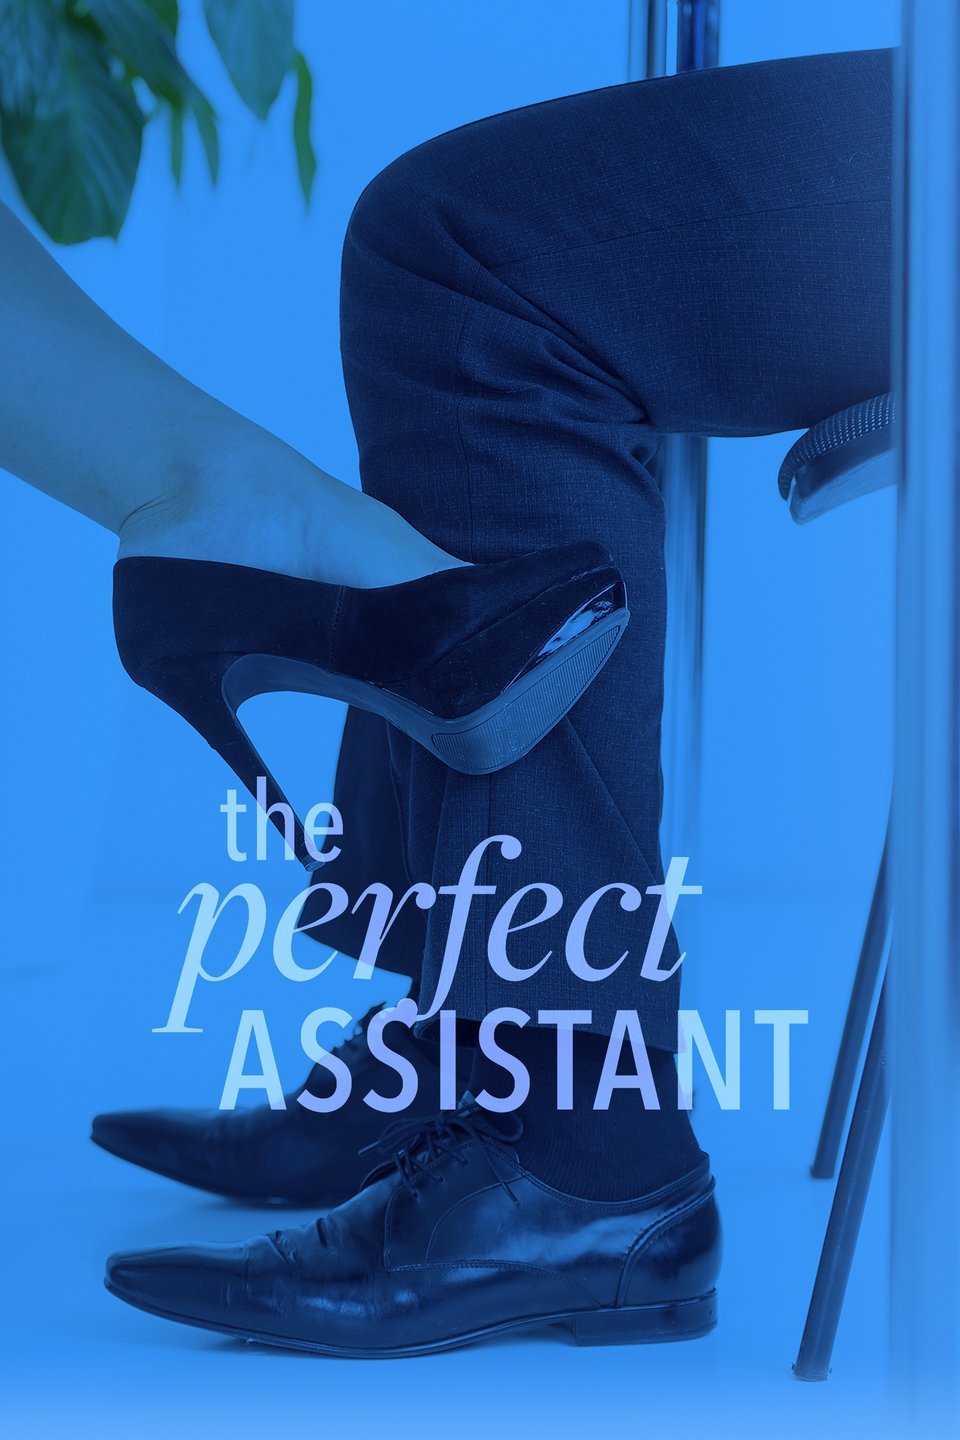 the perfect assistant kw